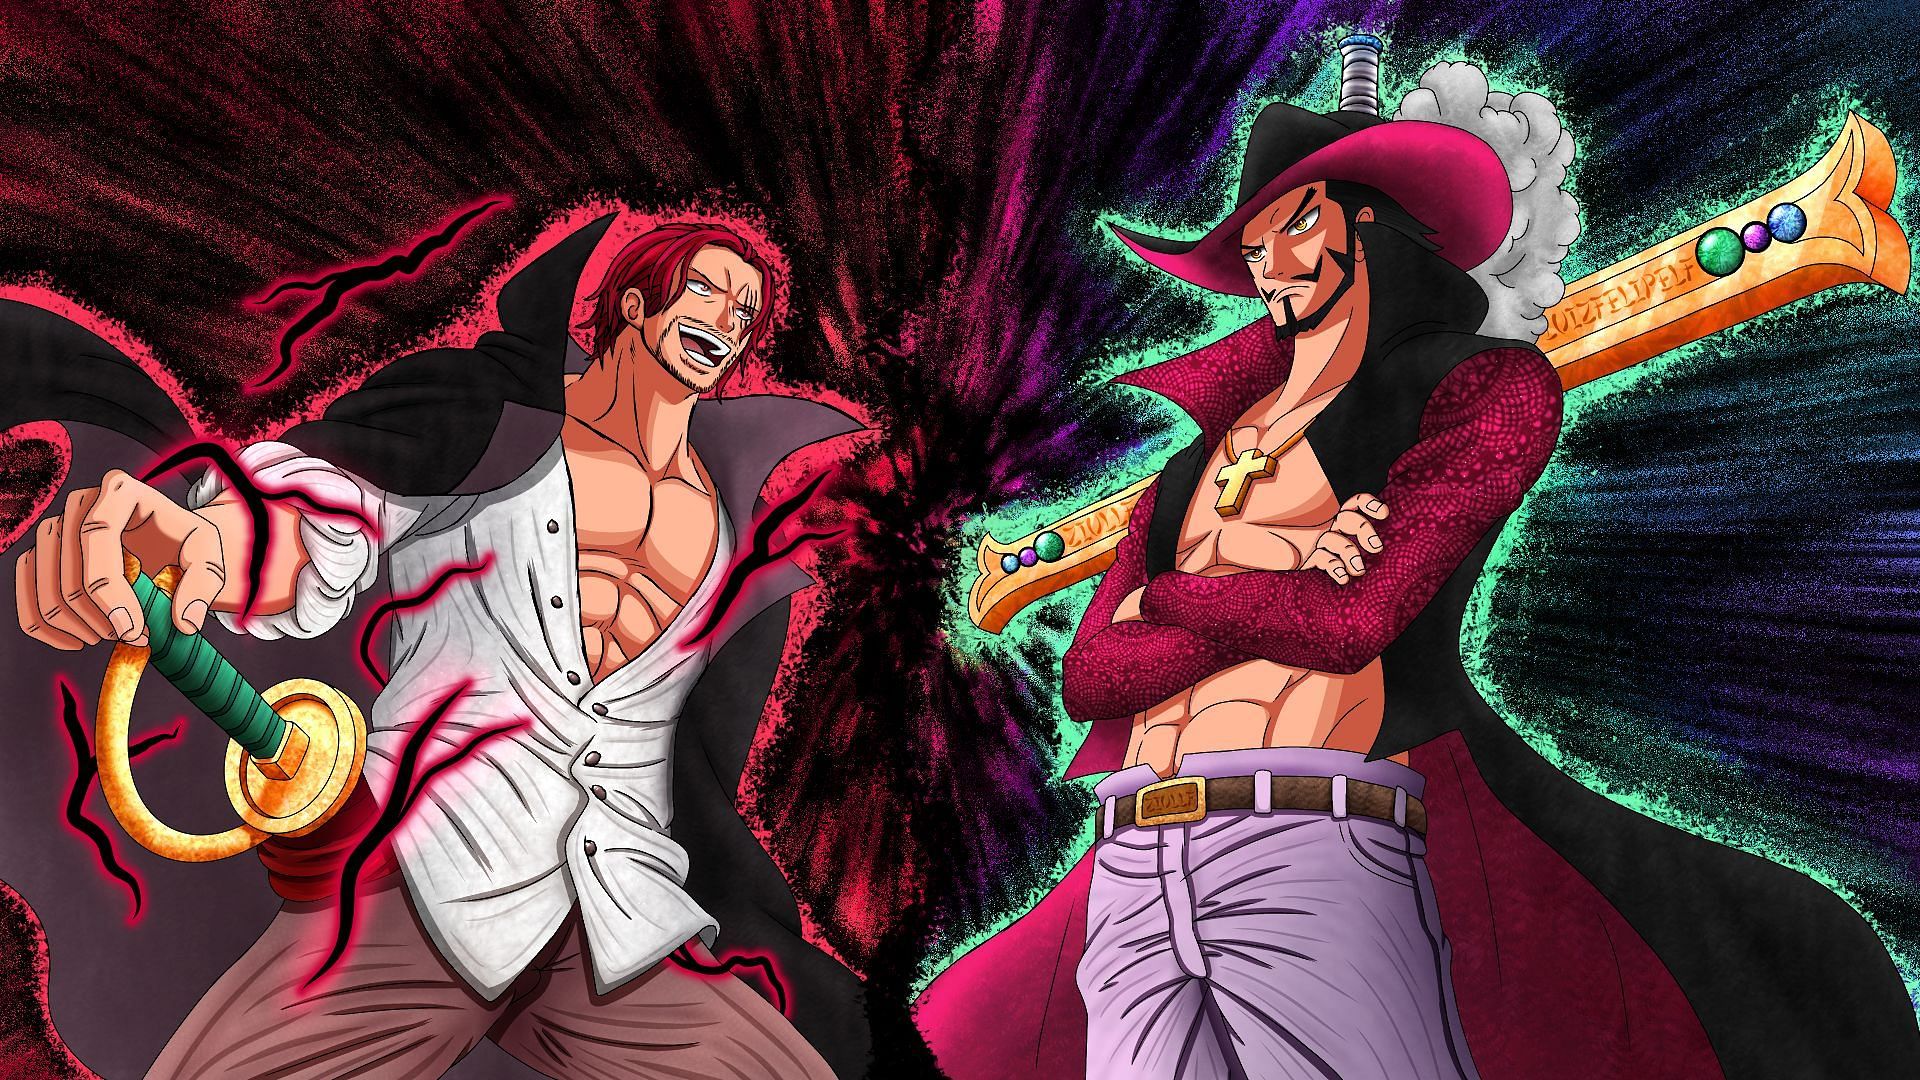 Red Hair Shanks and Hawk Eyes Mihawk, two of the most awaited characters of the series (Image via Eiichiro Oda/Shueisha/Toei Animation, One Piece)